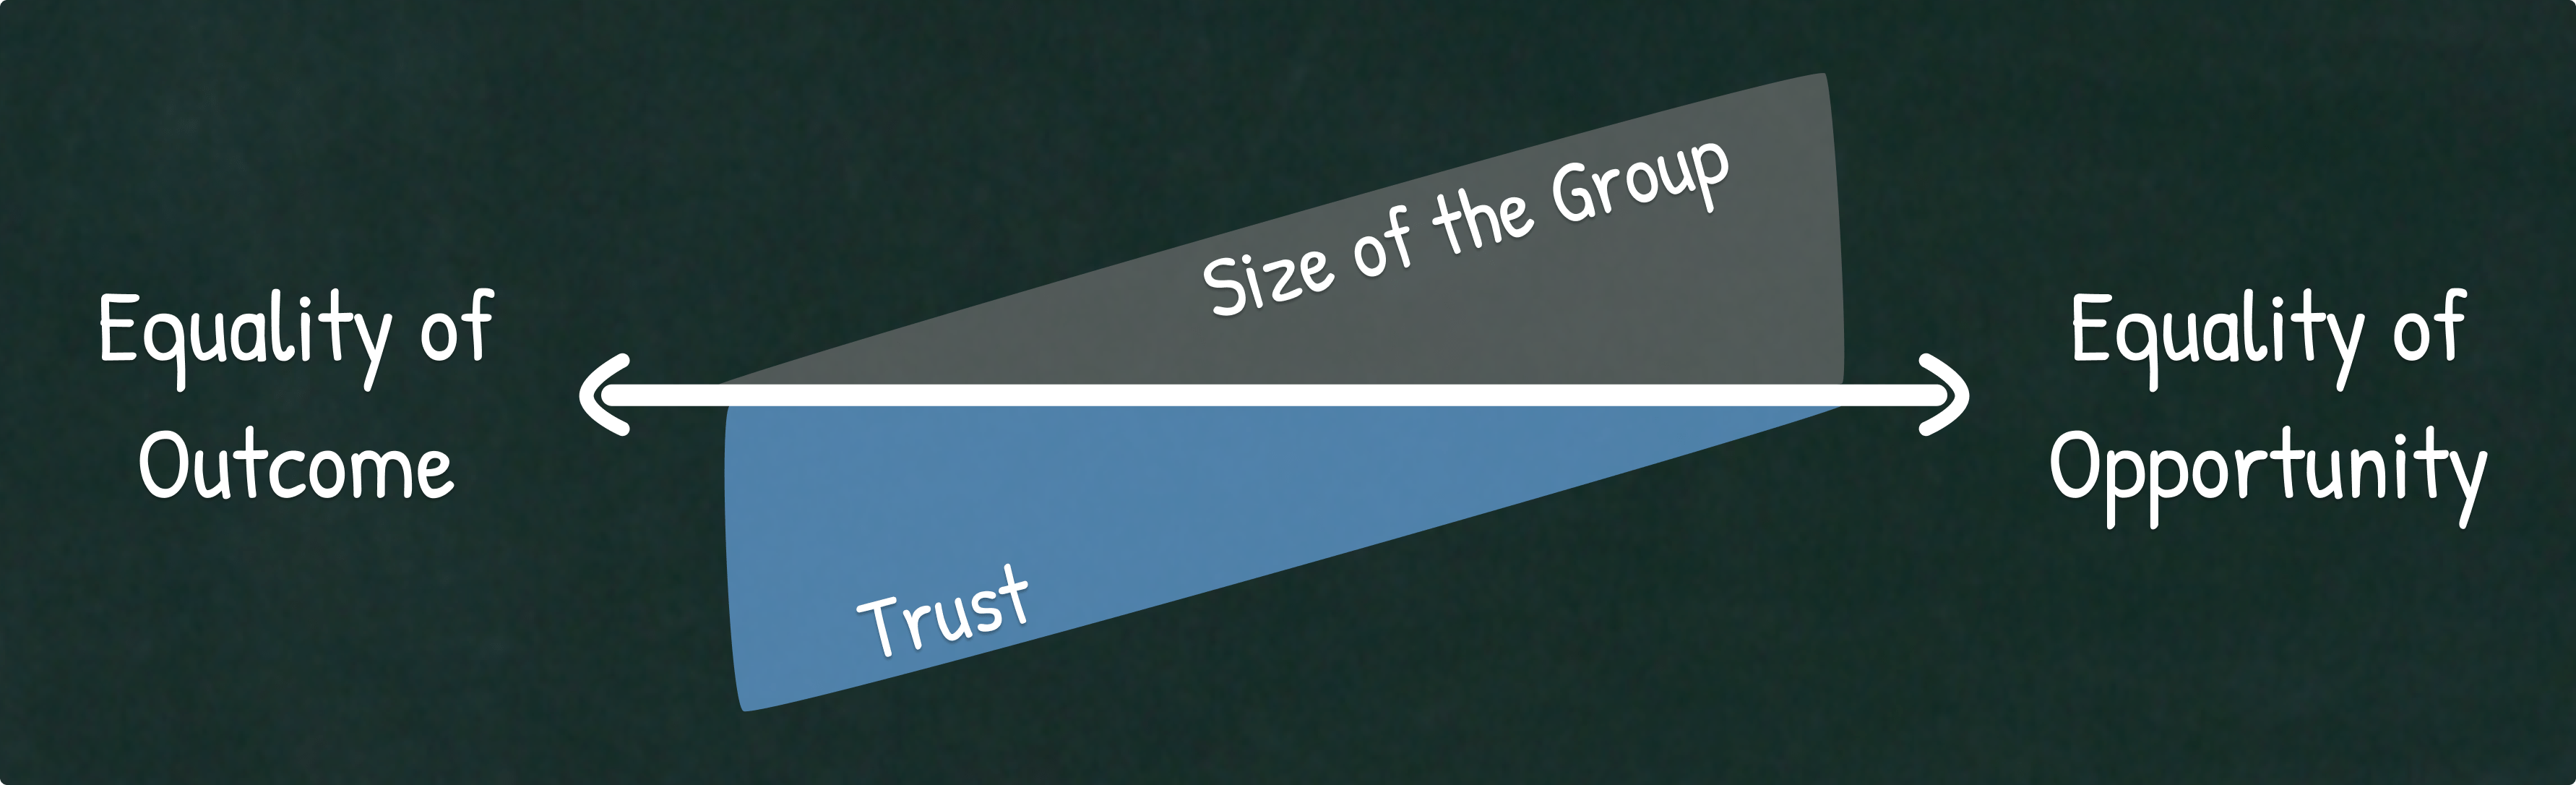 Illustration of how the System can change in function of the level of trust and the size of the group of people